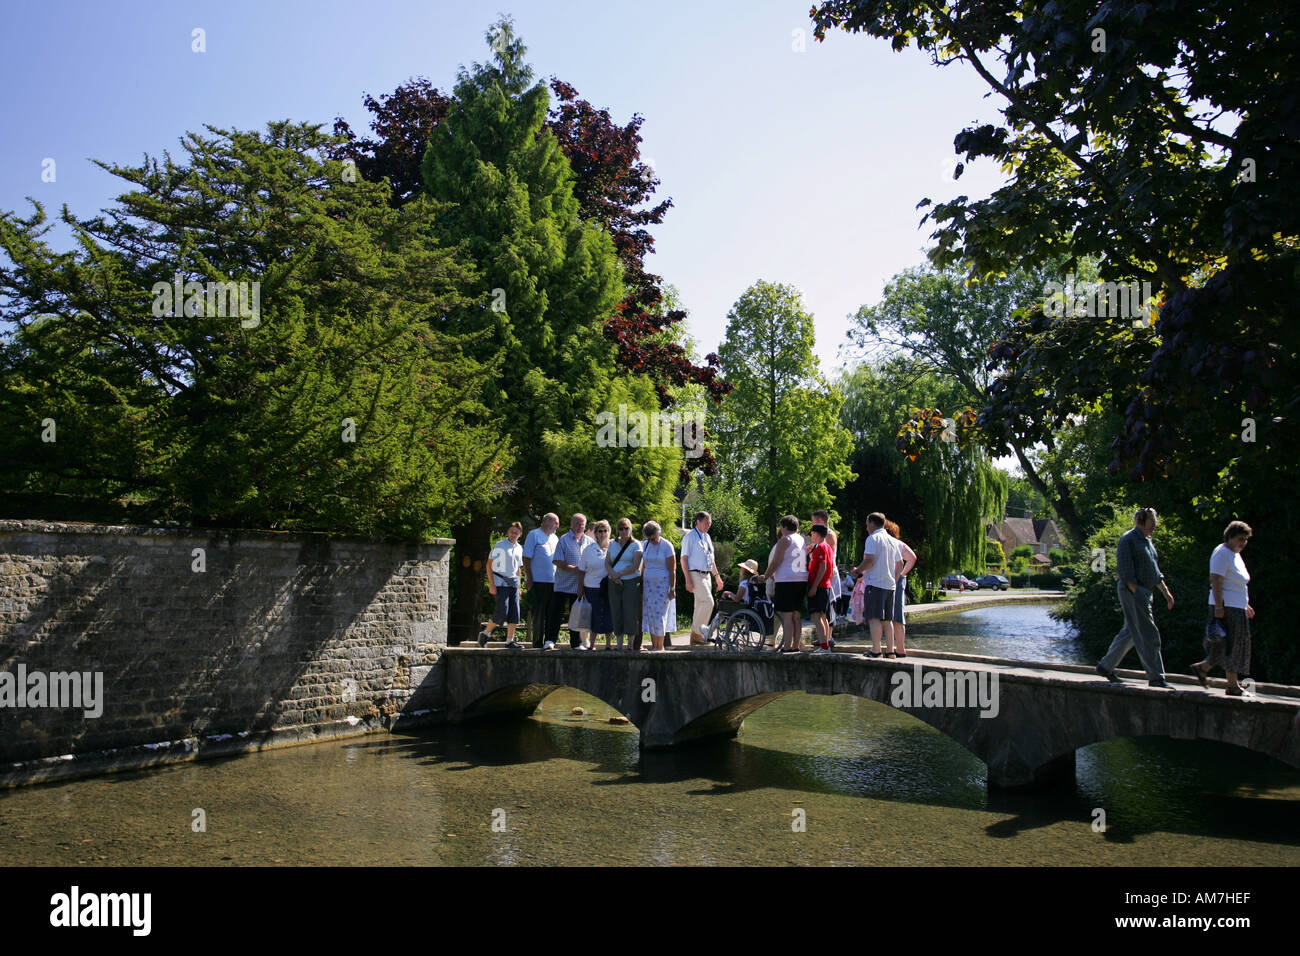 Group of tourists stand on a bridge posing for a photograph Bourton On The Water the Cotswolds Gloucestershire England UK GB Stock Photo